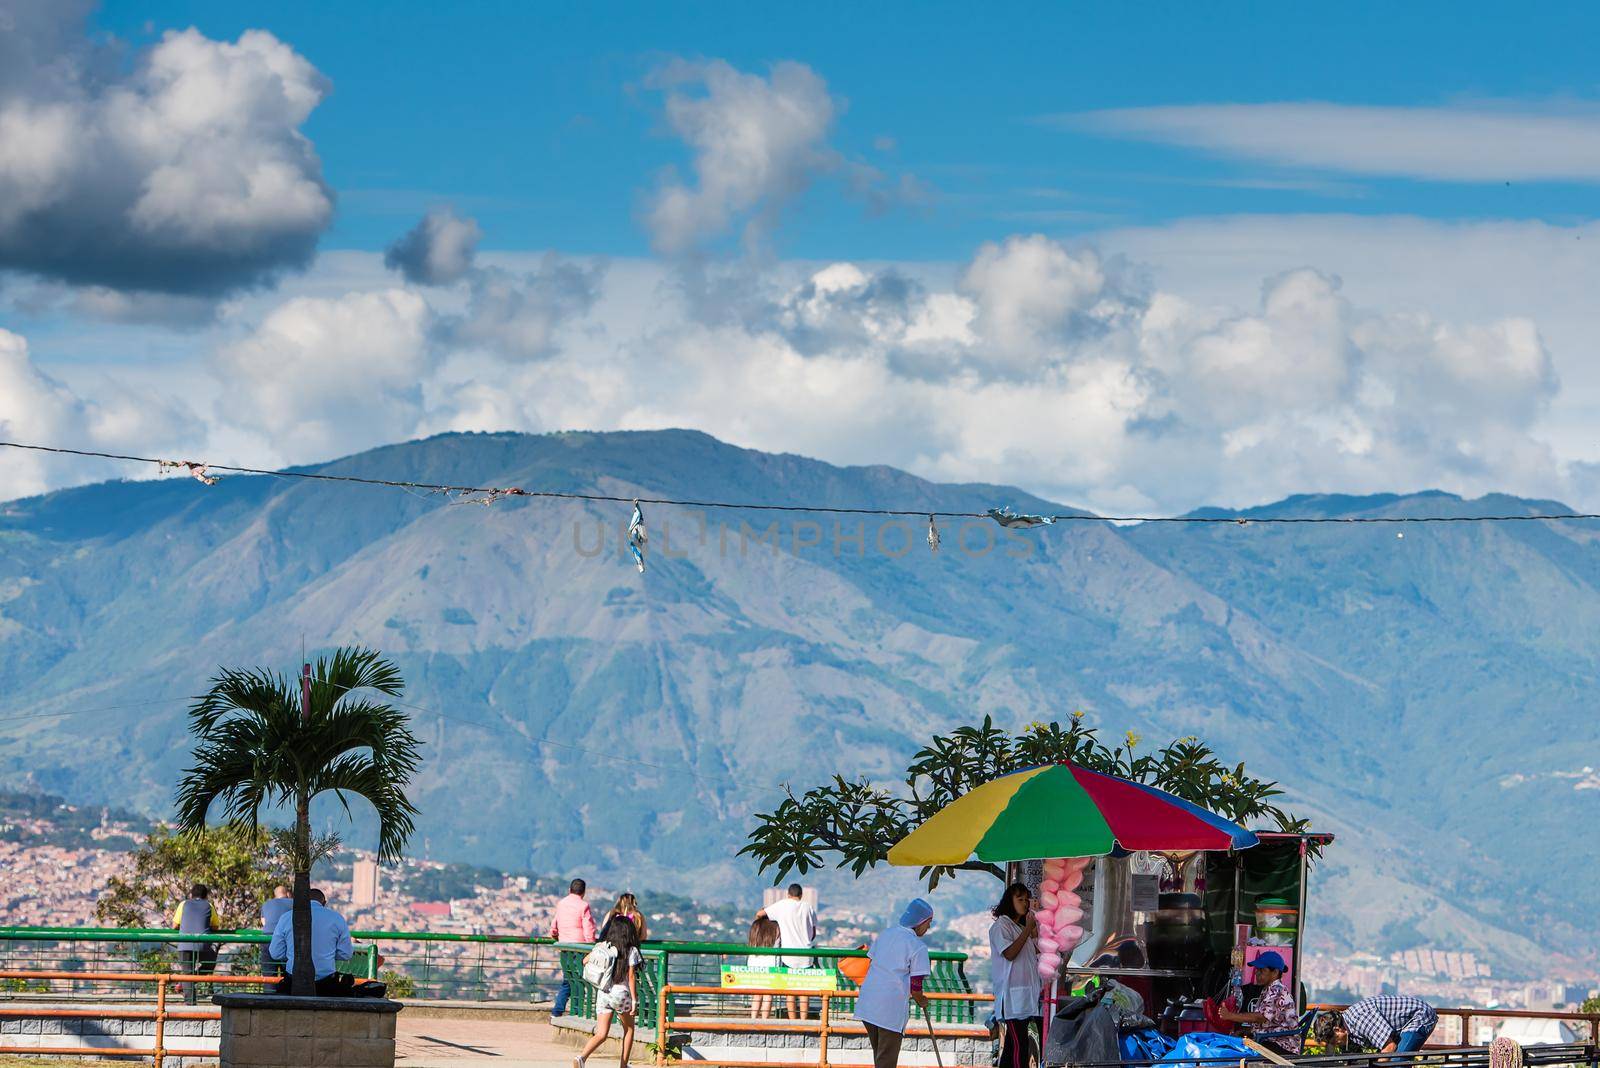 Palm tree and colorful umbrella and puffy clouds over mountains in Bogota Colombia. by jyurinko